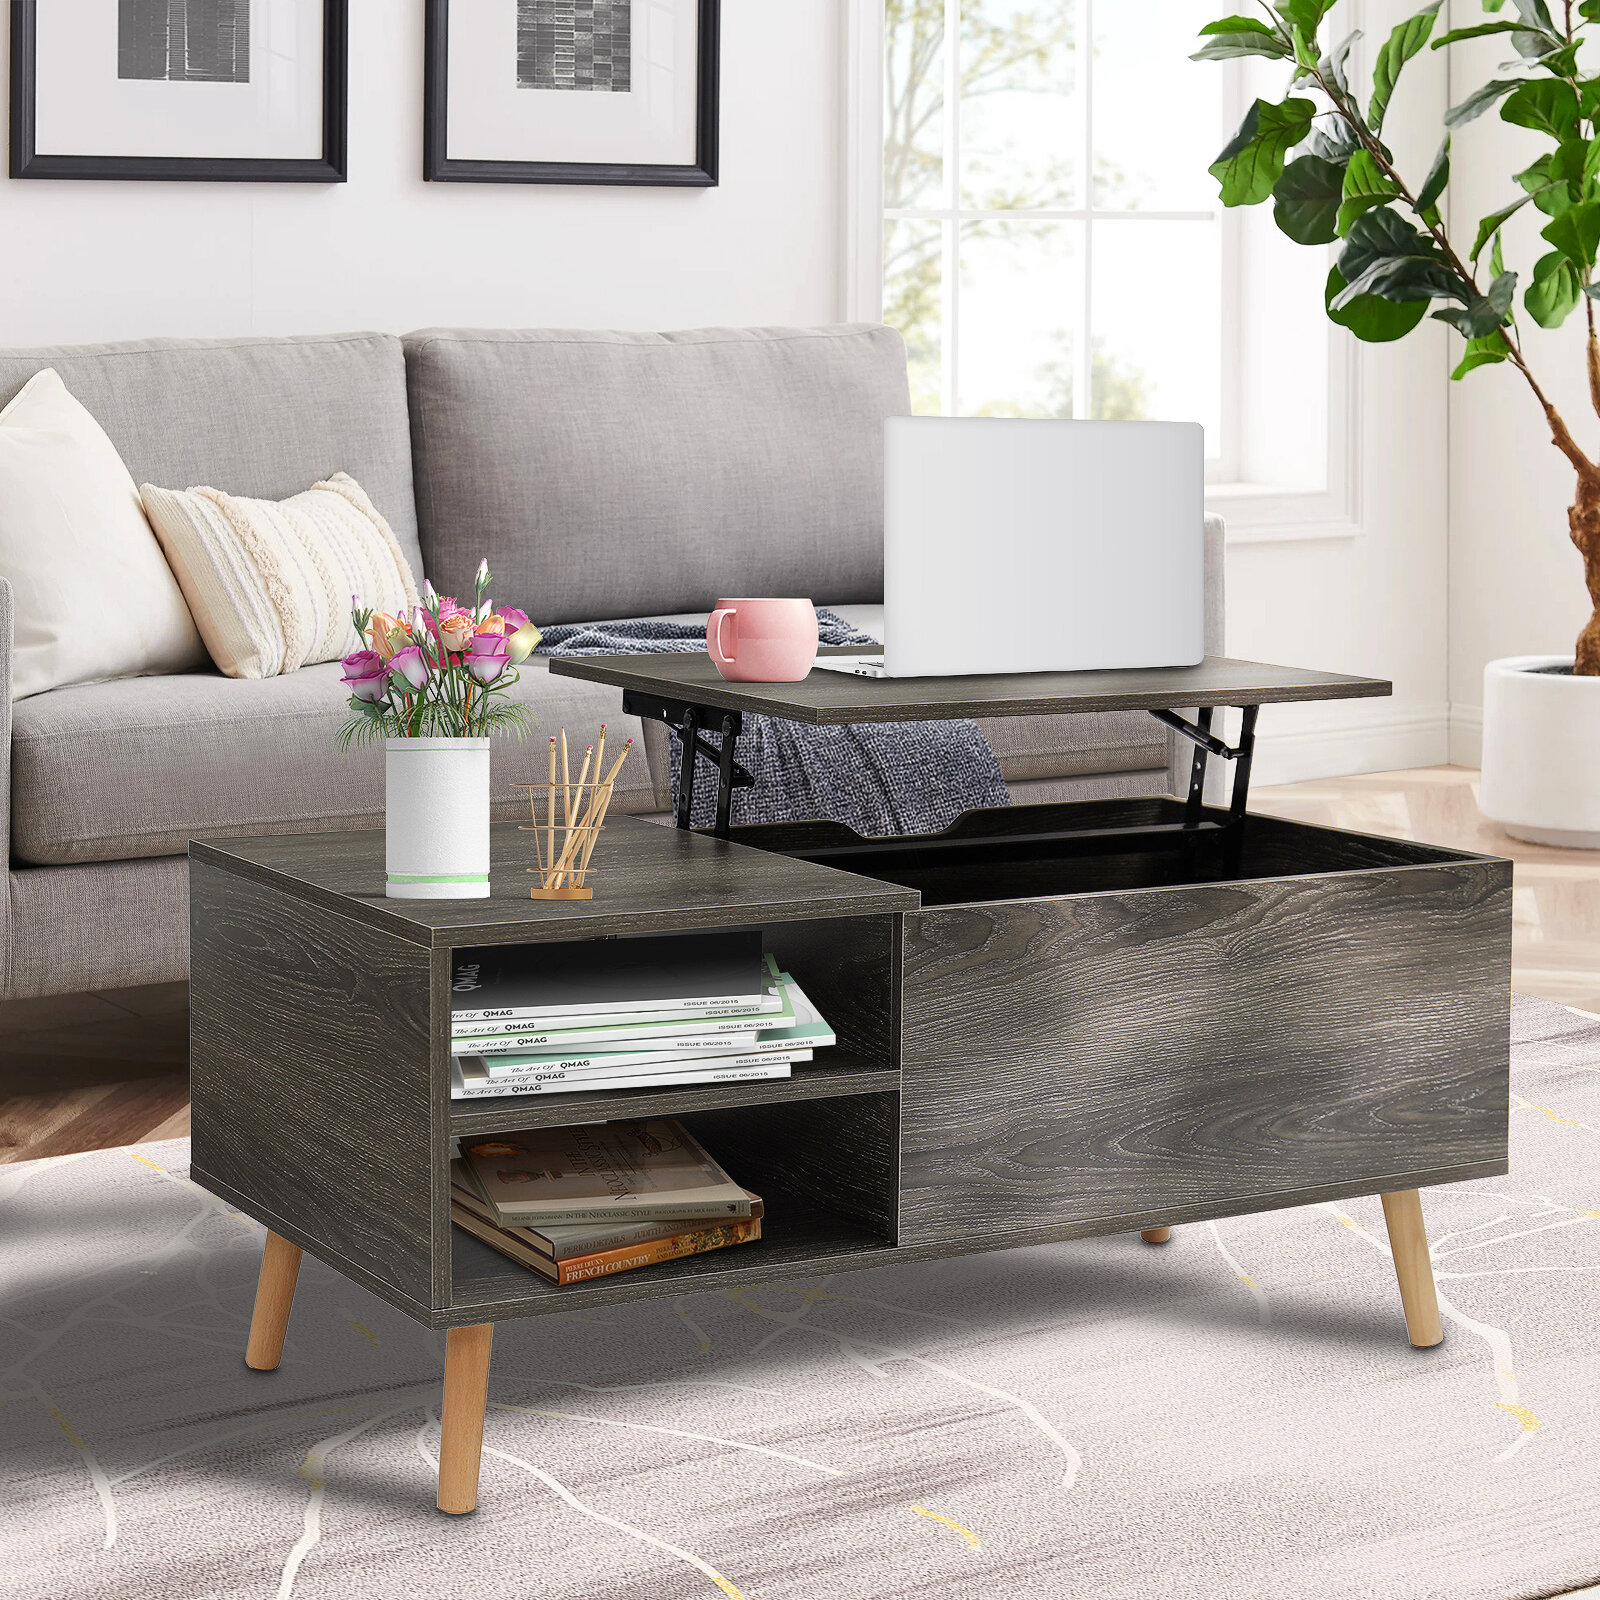 Image of Hommpa Lift Top Coffee Table with Hidden Storage and Side Drawer Charging Station for Home Living Room